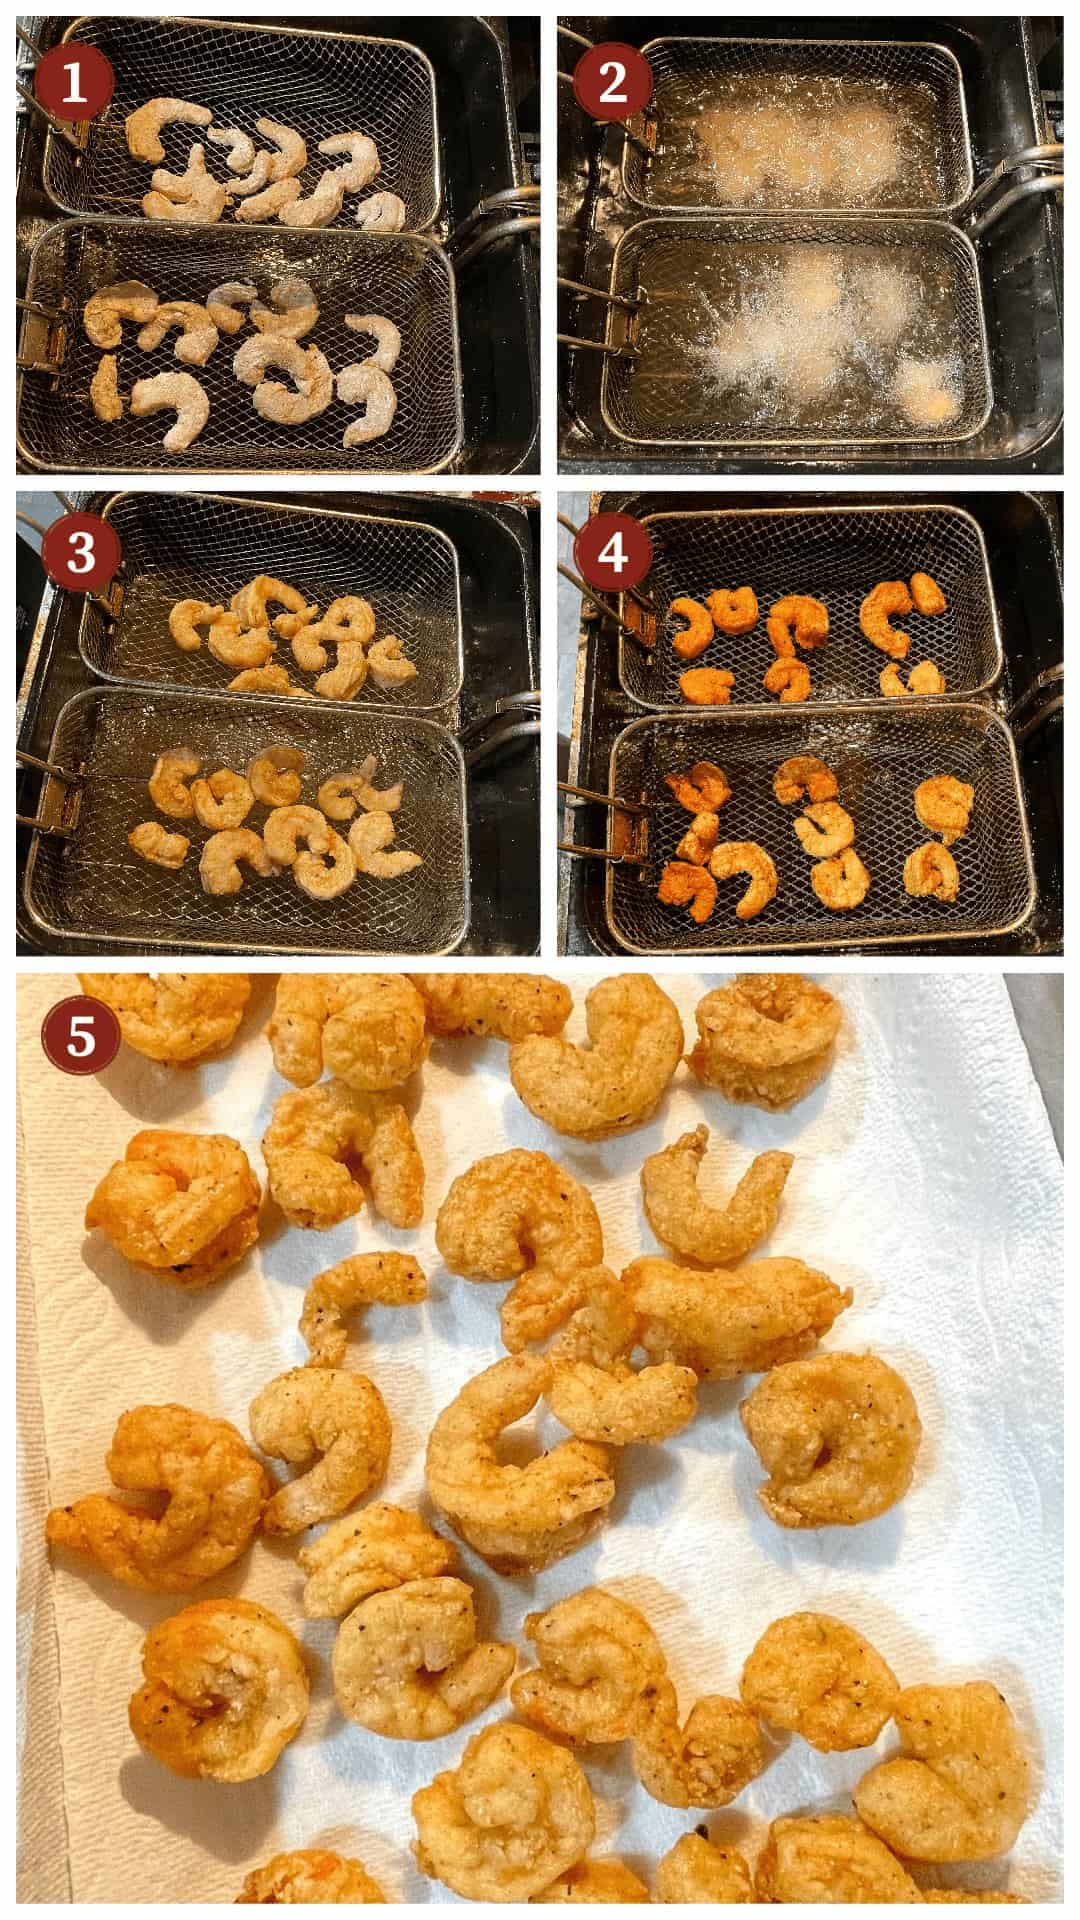 A collage of images showing how to fry shrimp for po boys, steps 1-5.